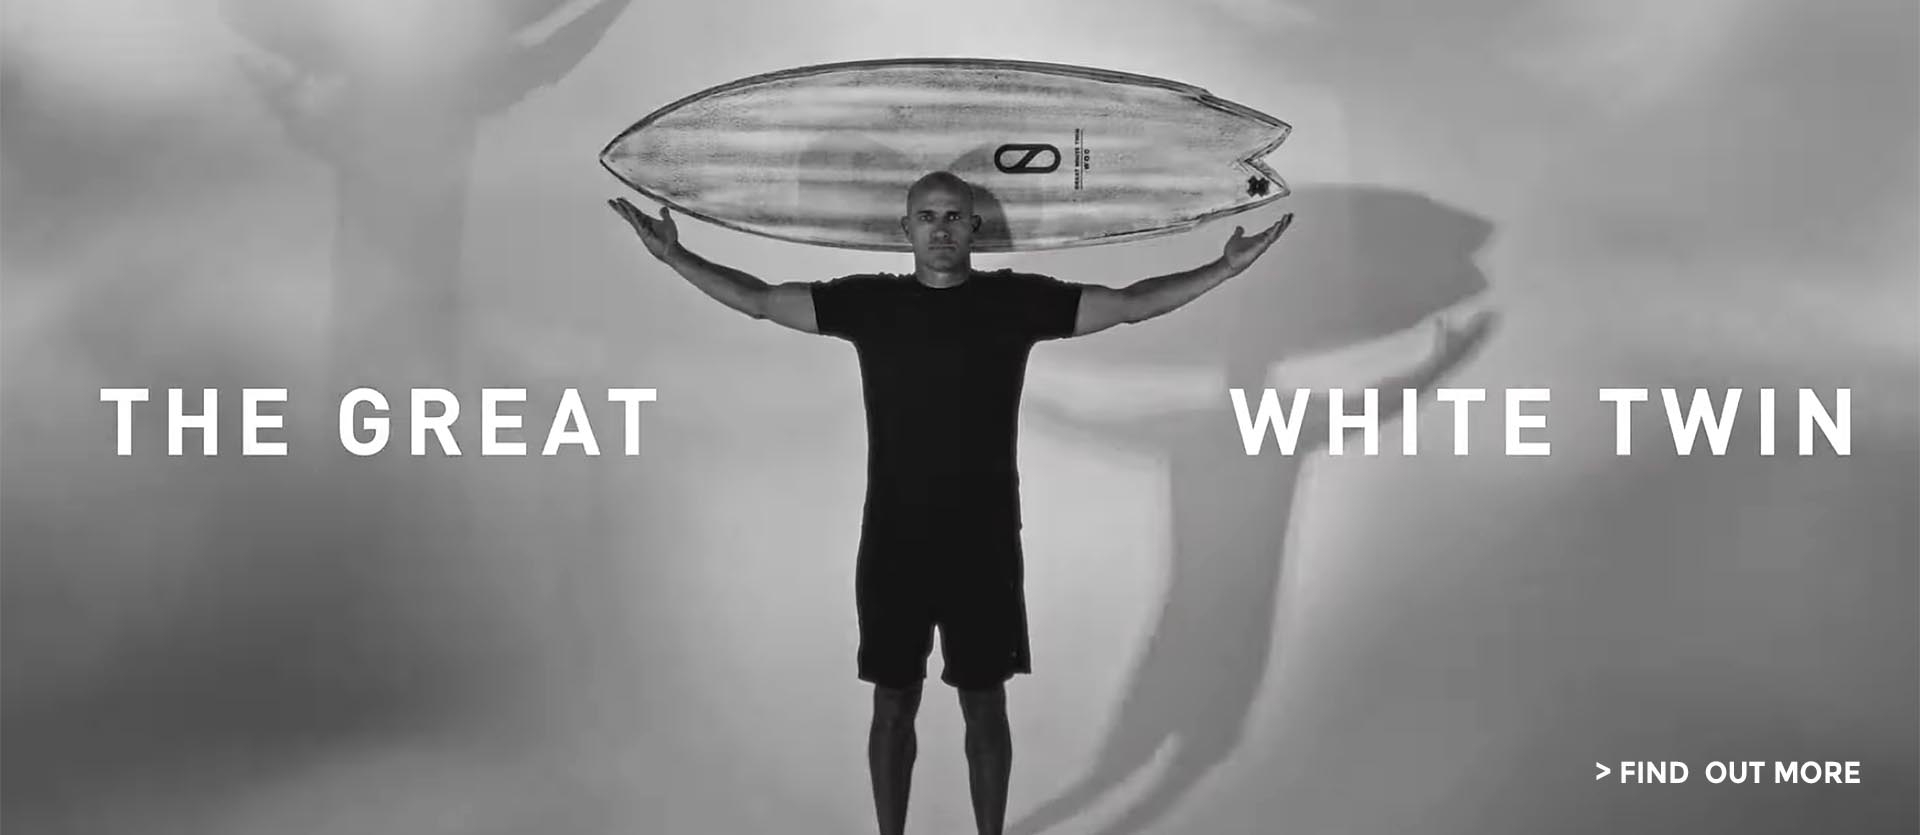 The Great White Twin by Kelly Slater Designs